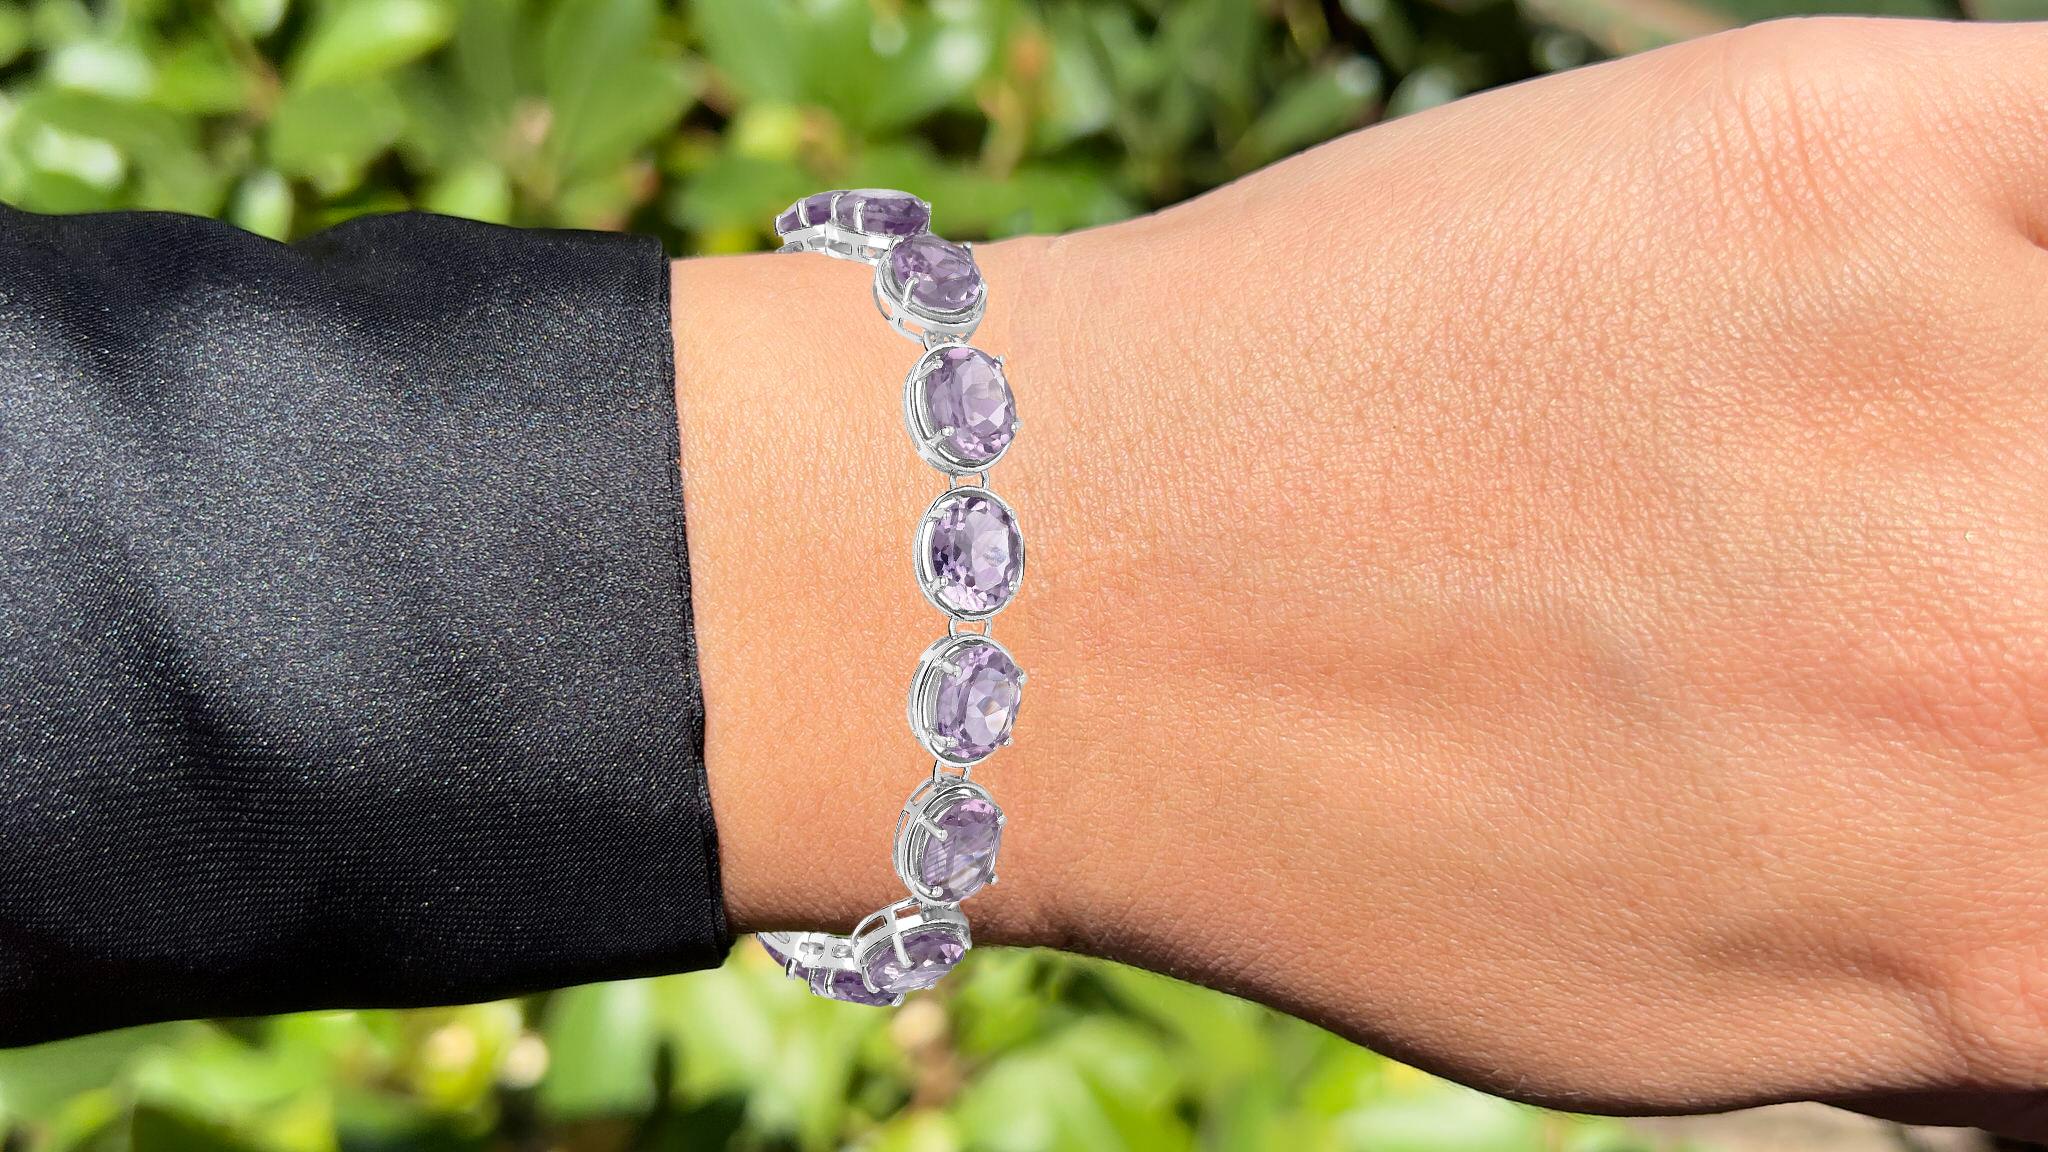 It comes with the appraisal by GIA GG/AJP
All Gemstones are Natural
14 Amethysts = 30.10 Carats
Metal: Rhodium Plated Sterling Silver
Length: 7.50 Inches